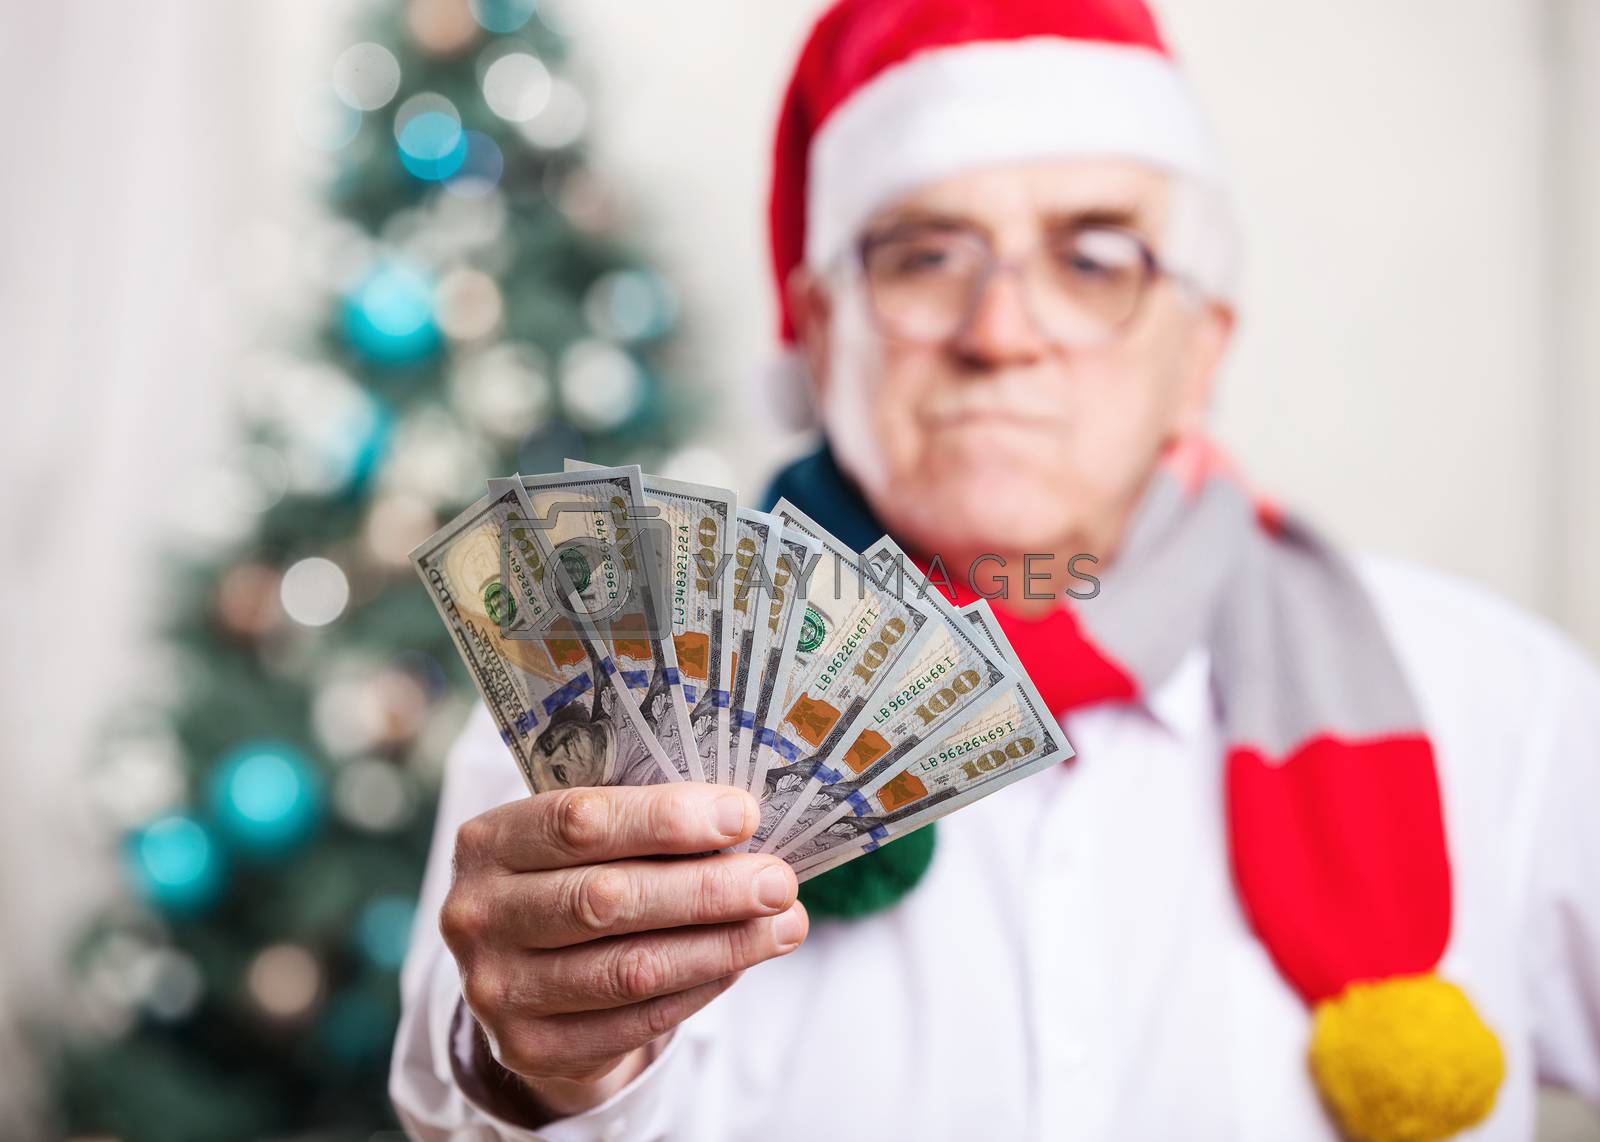 Royalty free image of Man in Santa's hat holding money, hand in focus by photobac